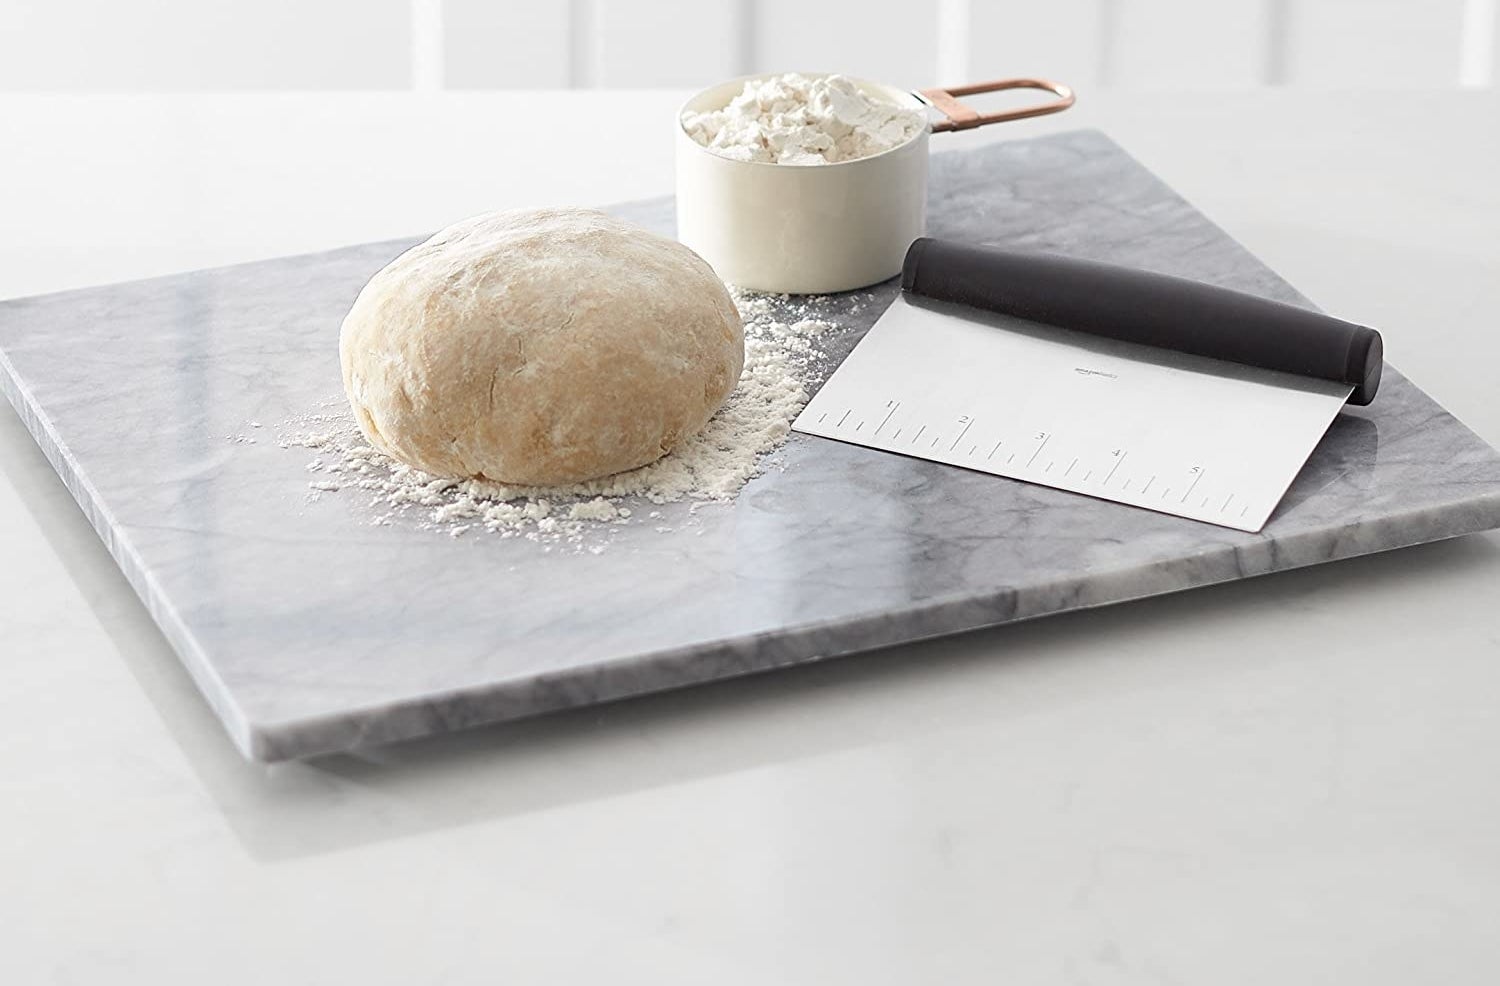 Dough sitting on a marble board with a bench scraper beside it